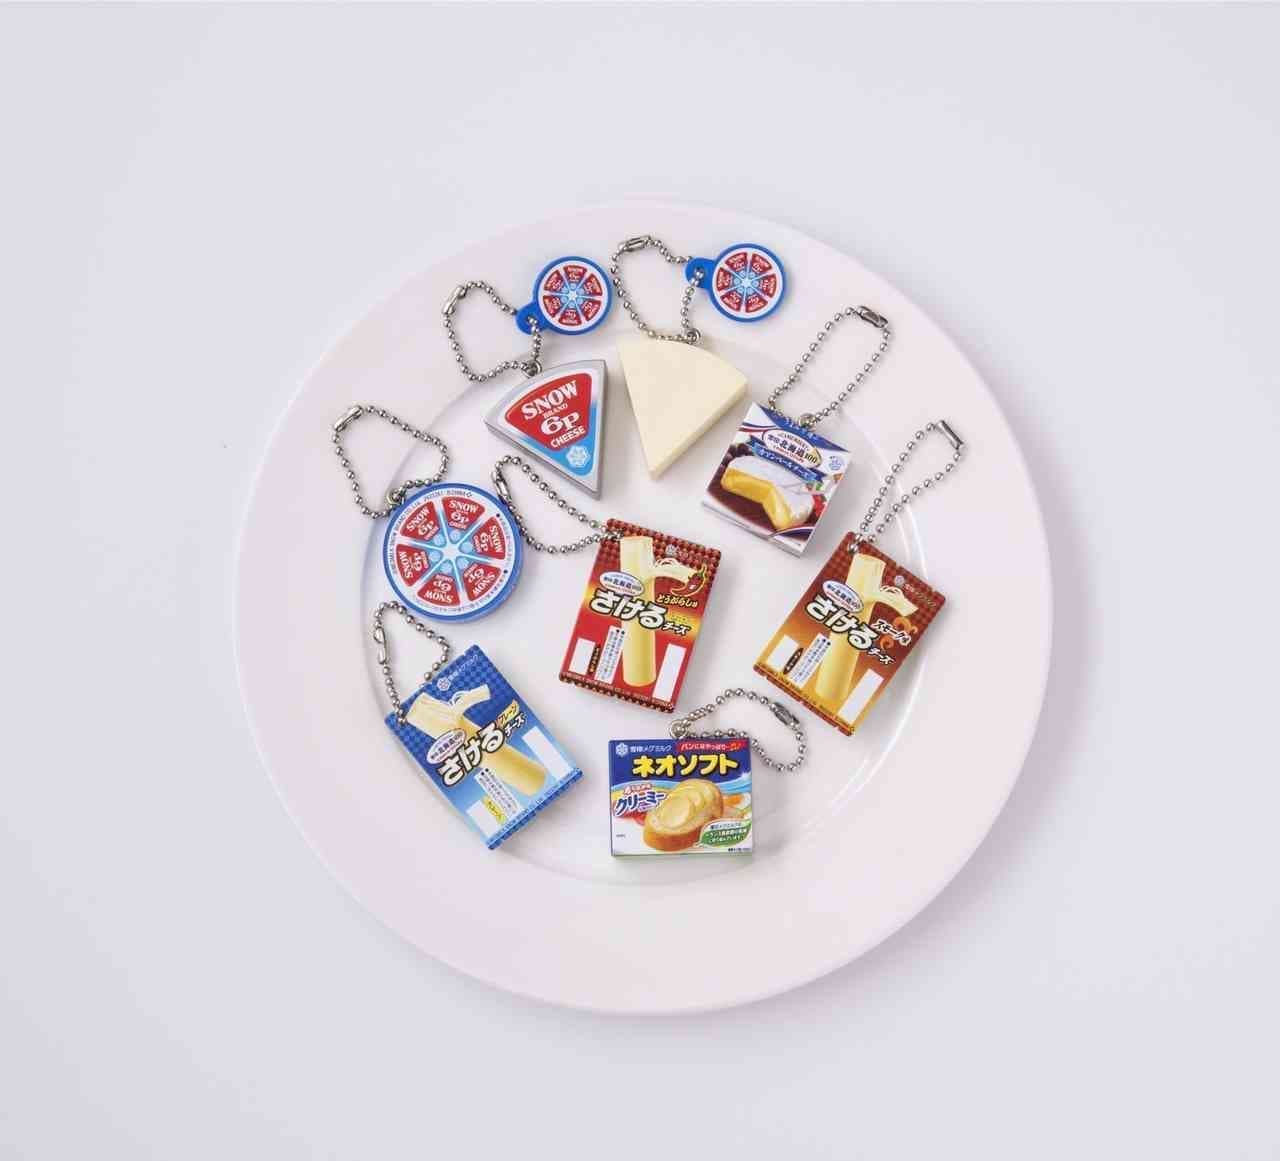 Snow Brand MegMilk Miniature Charms - Dairy Products Series